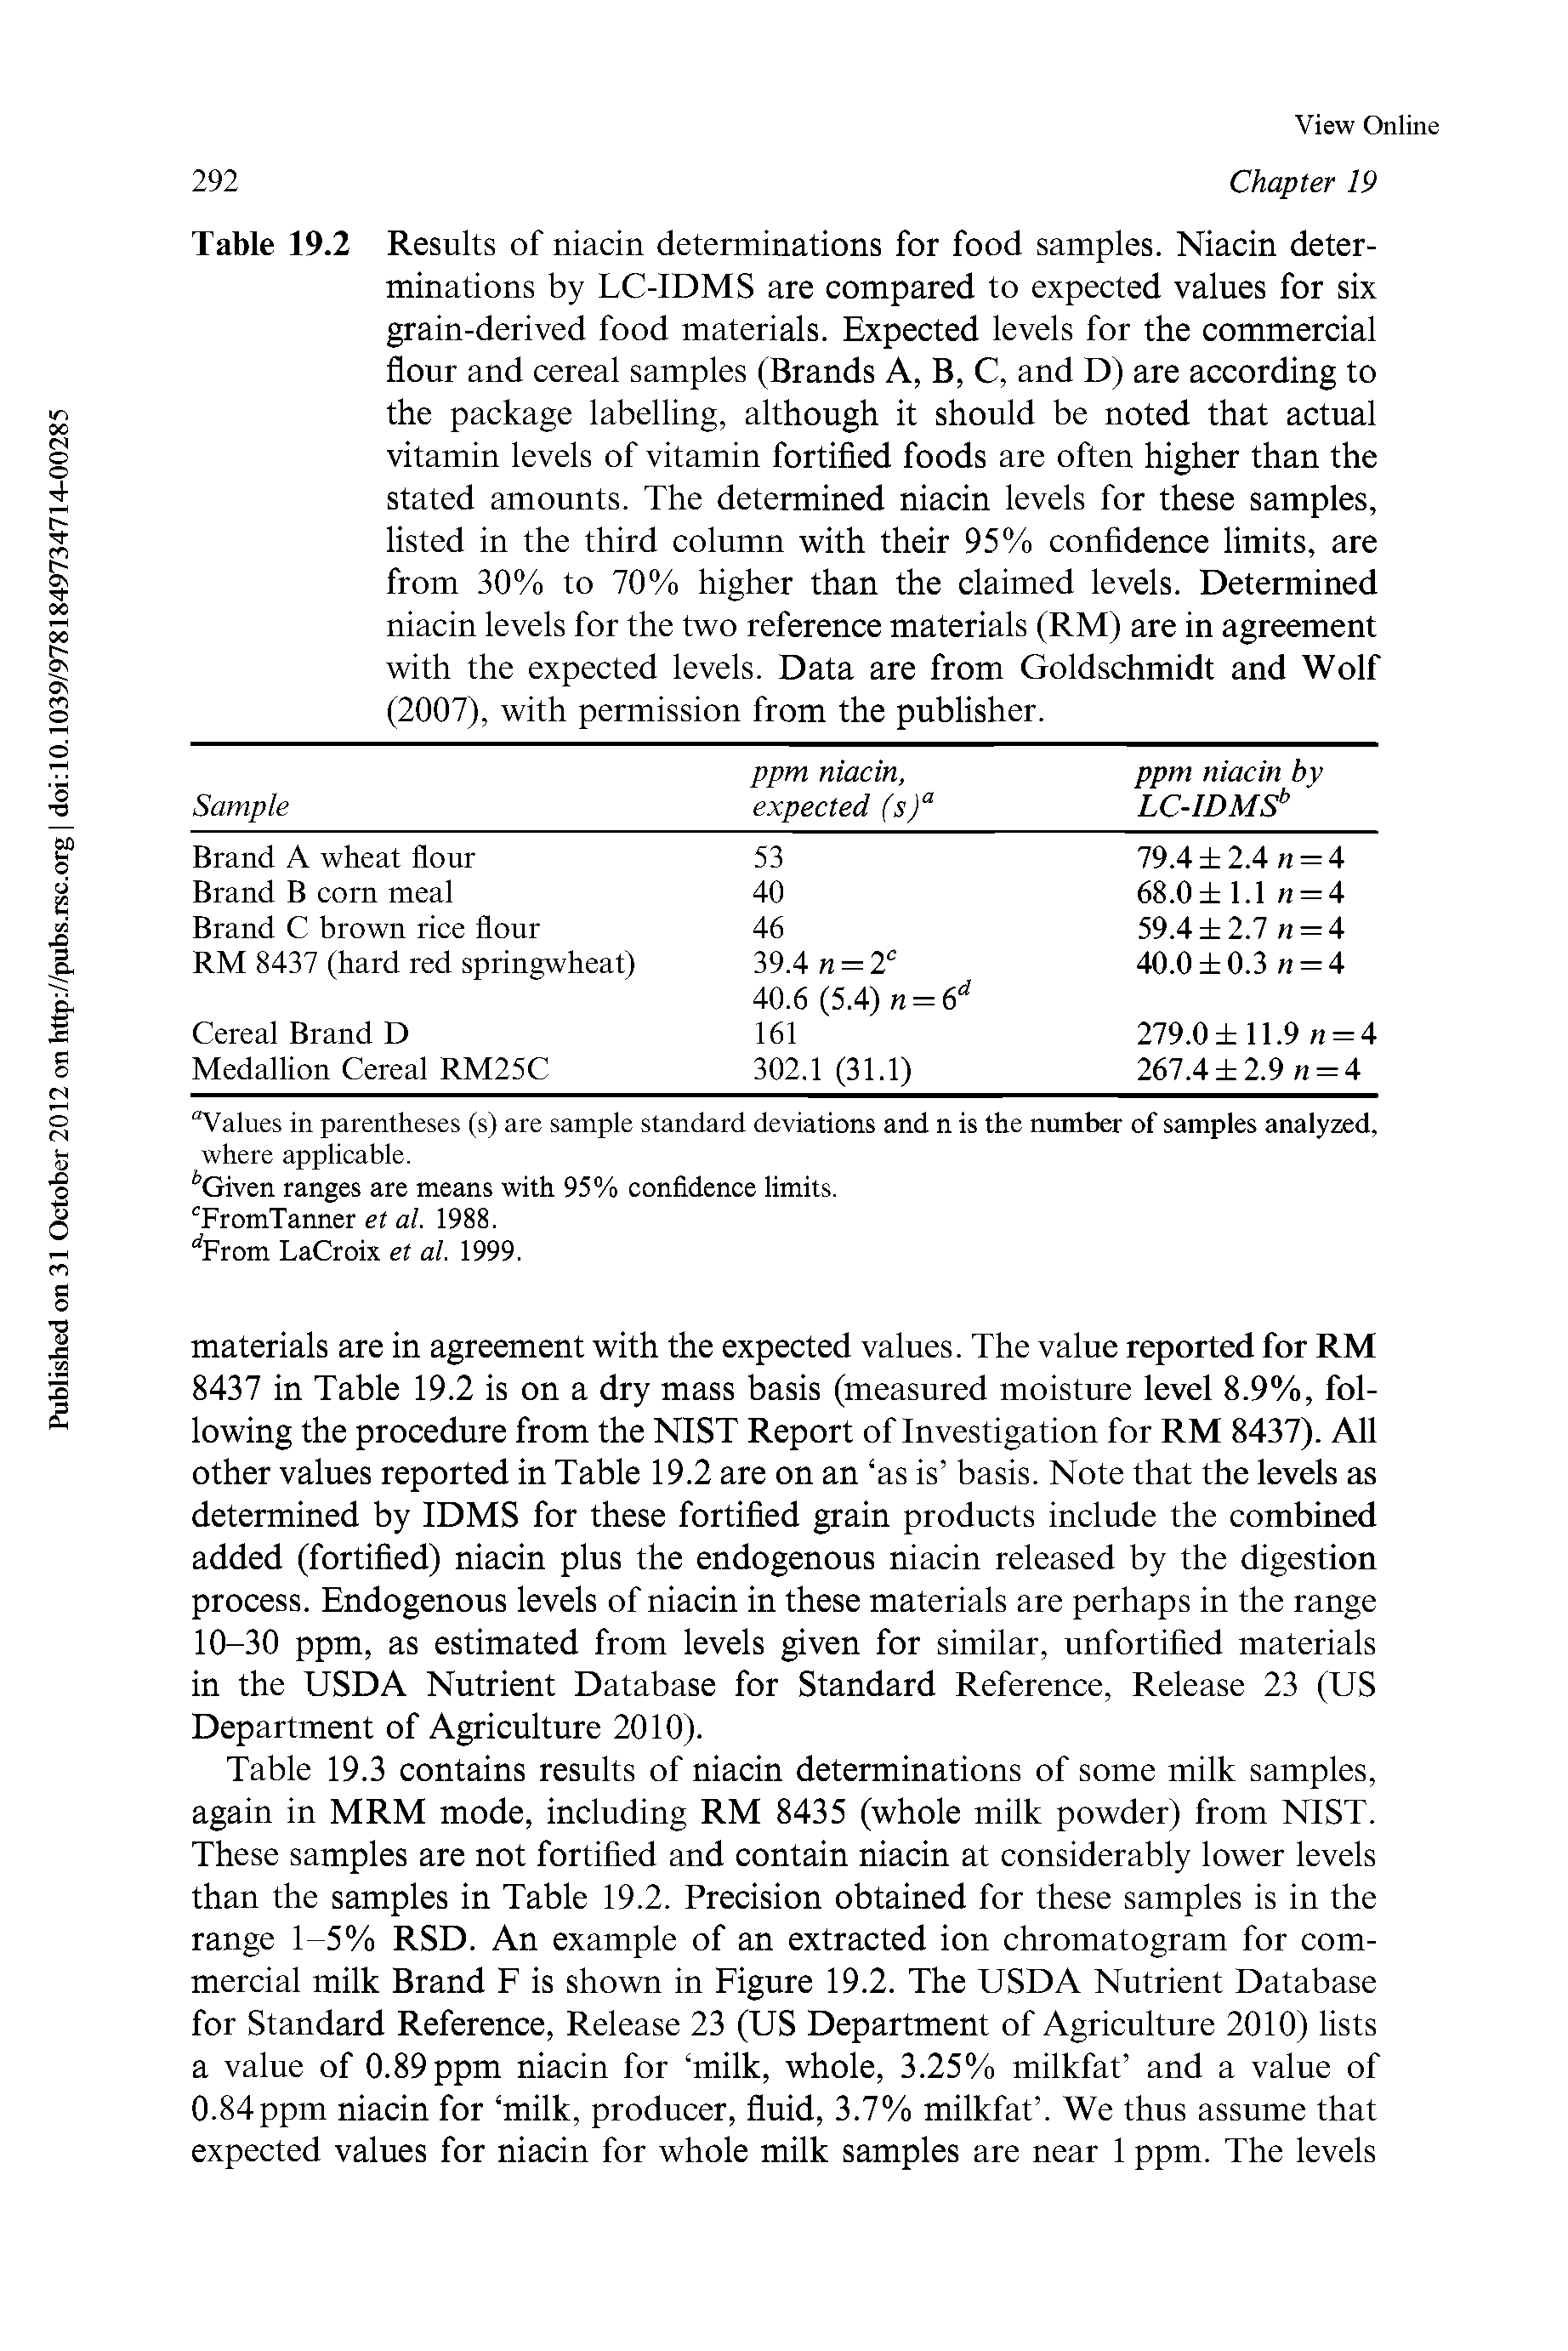 Table 19.3 contains results of niacin determinations of some milk samples, again in MRM mode, including RM 8435 (whole milk powder) from NIST. These samples are not fortified and contain niacin at considerably lower levels than the samples in Table 19.2. Precision obtained for these samples is in the range 1-5% RSD. An example of an extracted ion chromatogram for commercial milk Brand F is shown in Figure 19.2. The USDA Nutrient Database for Standard Reference, Release 23 (US Department of Agriculture 2010) lists a value of 0.89 ppm niacin for milk, whole, 3.25% milkfat and a value of 0.84ppm niacin for milk, producer, fluid, 3.7% milkfat . We thus assume that expected values for niacin for whole milk samples are near 1 ppm. The levels...